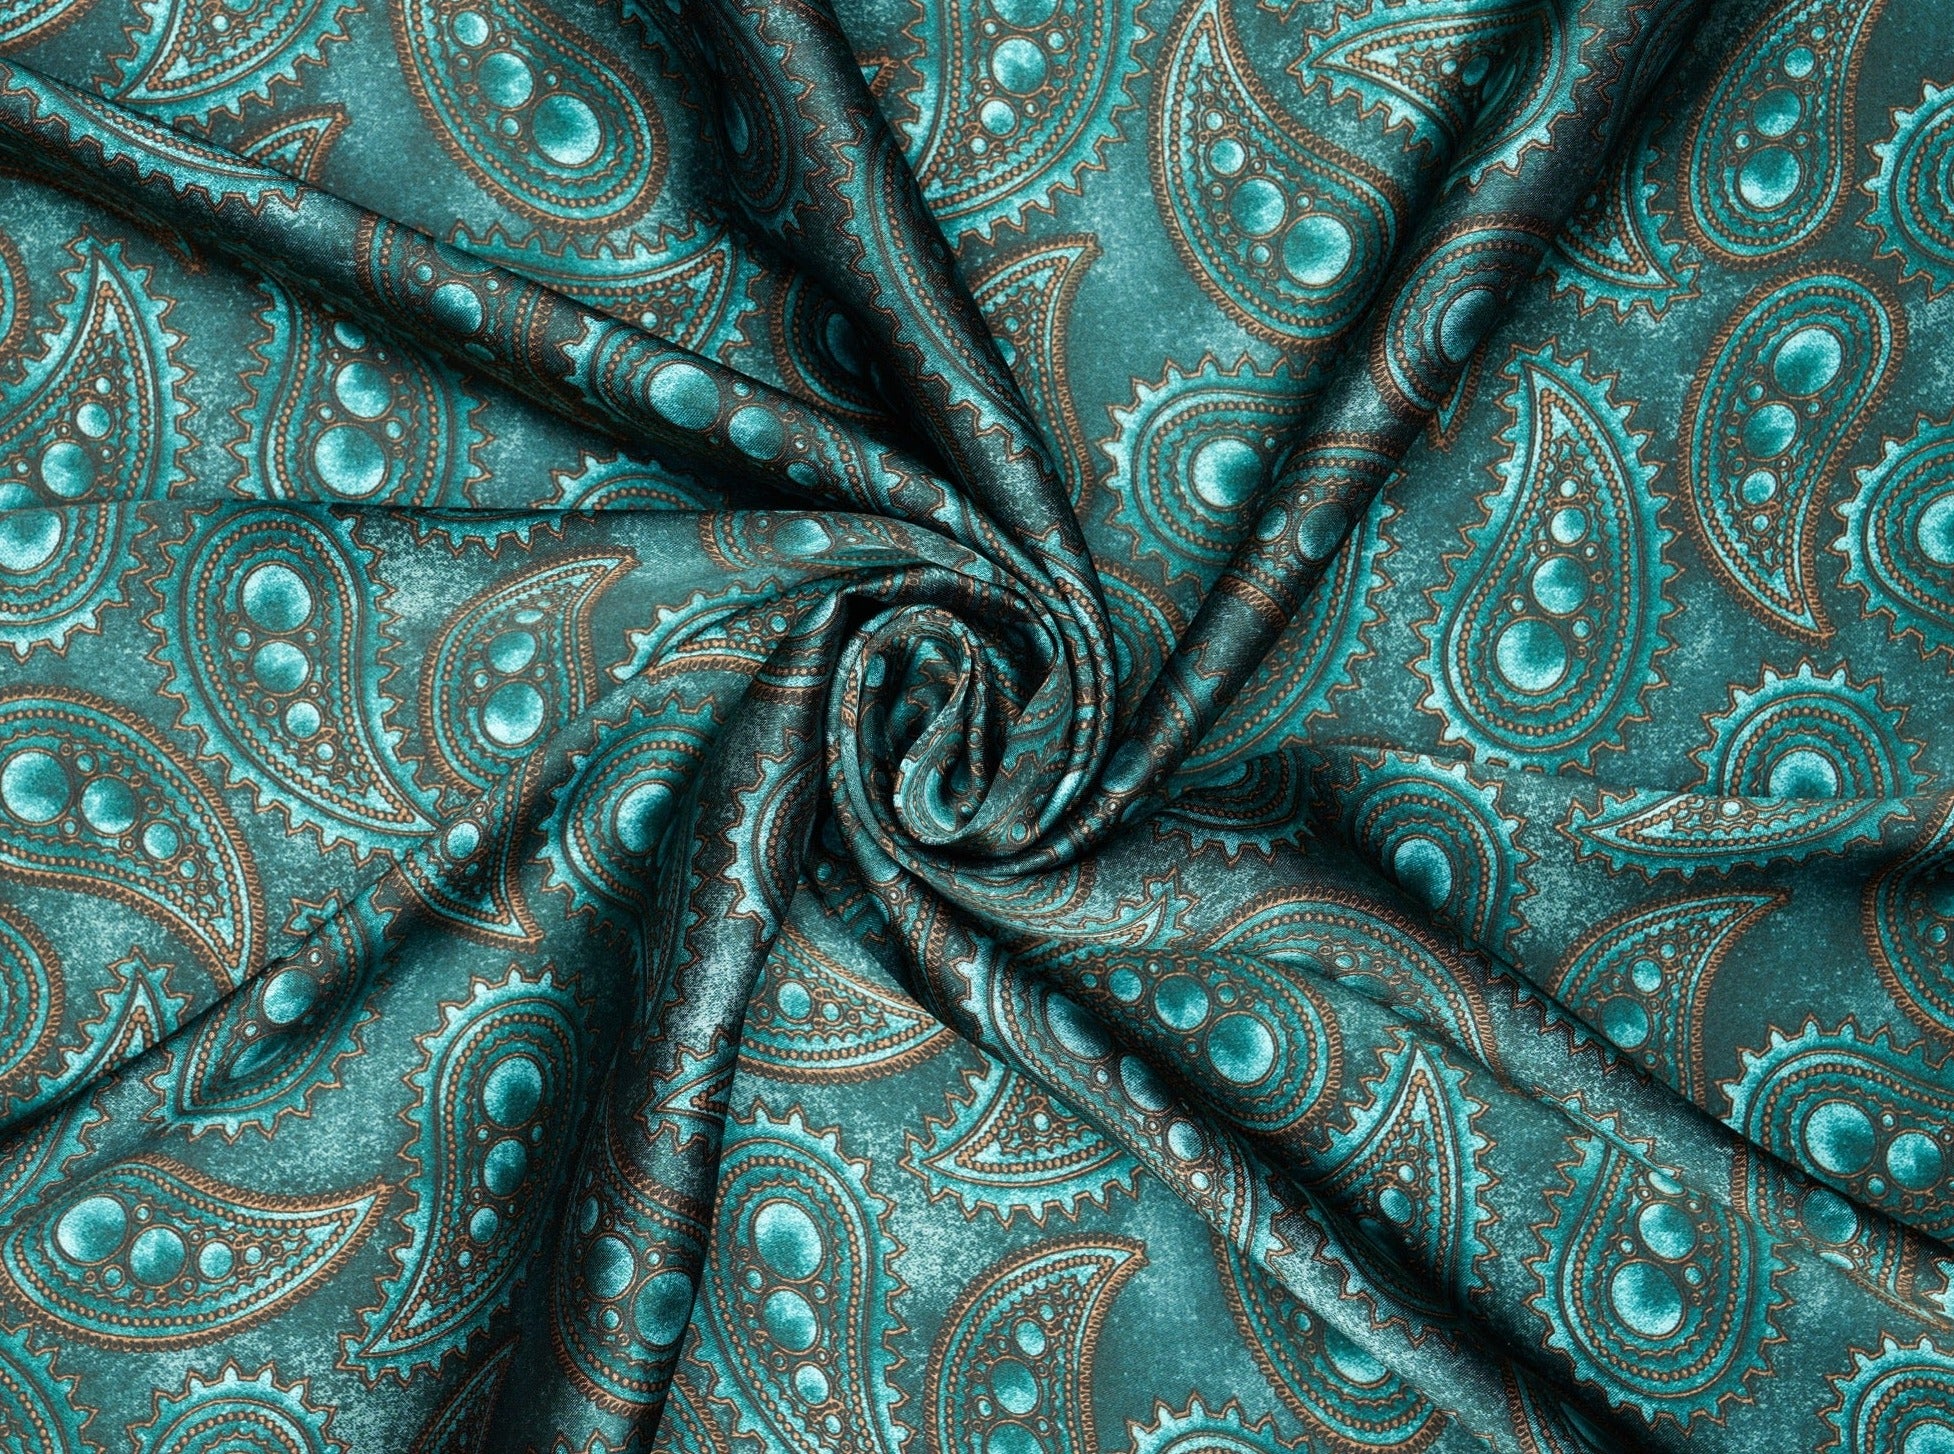 Pucci-esque Paisley-Like Printed Silk Charmeuse - Purple / Greens / Oranges  / White - Fabric by the Yard